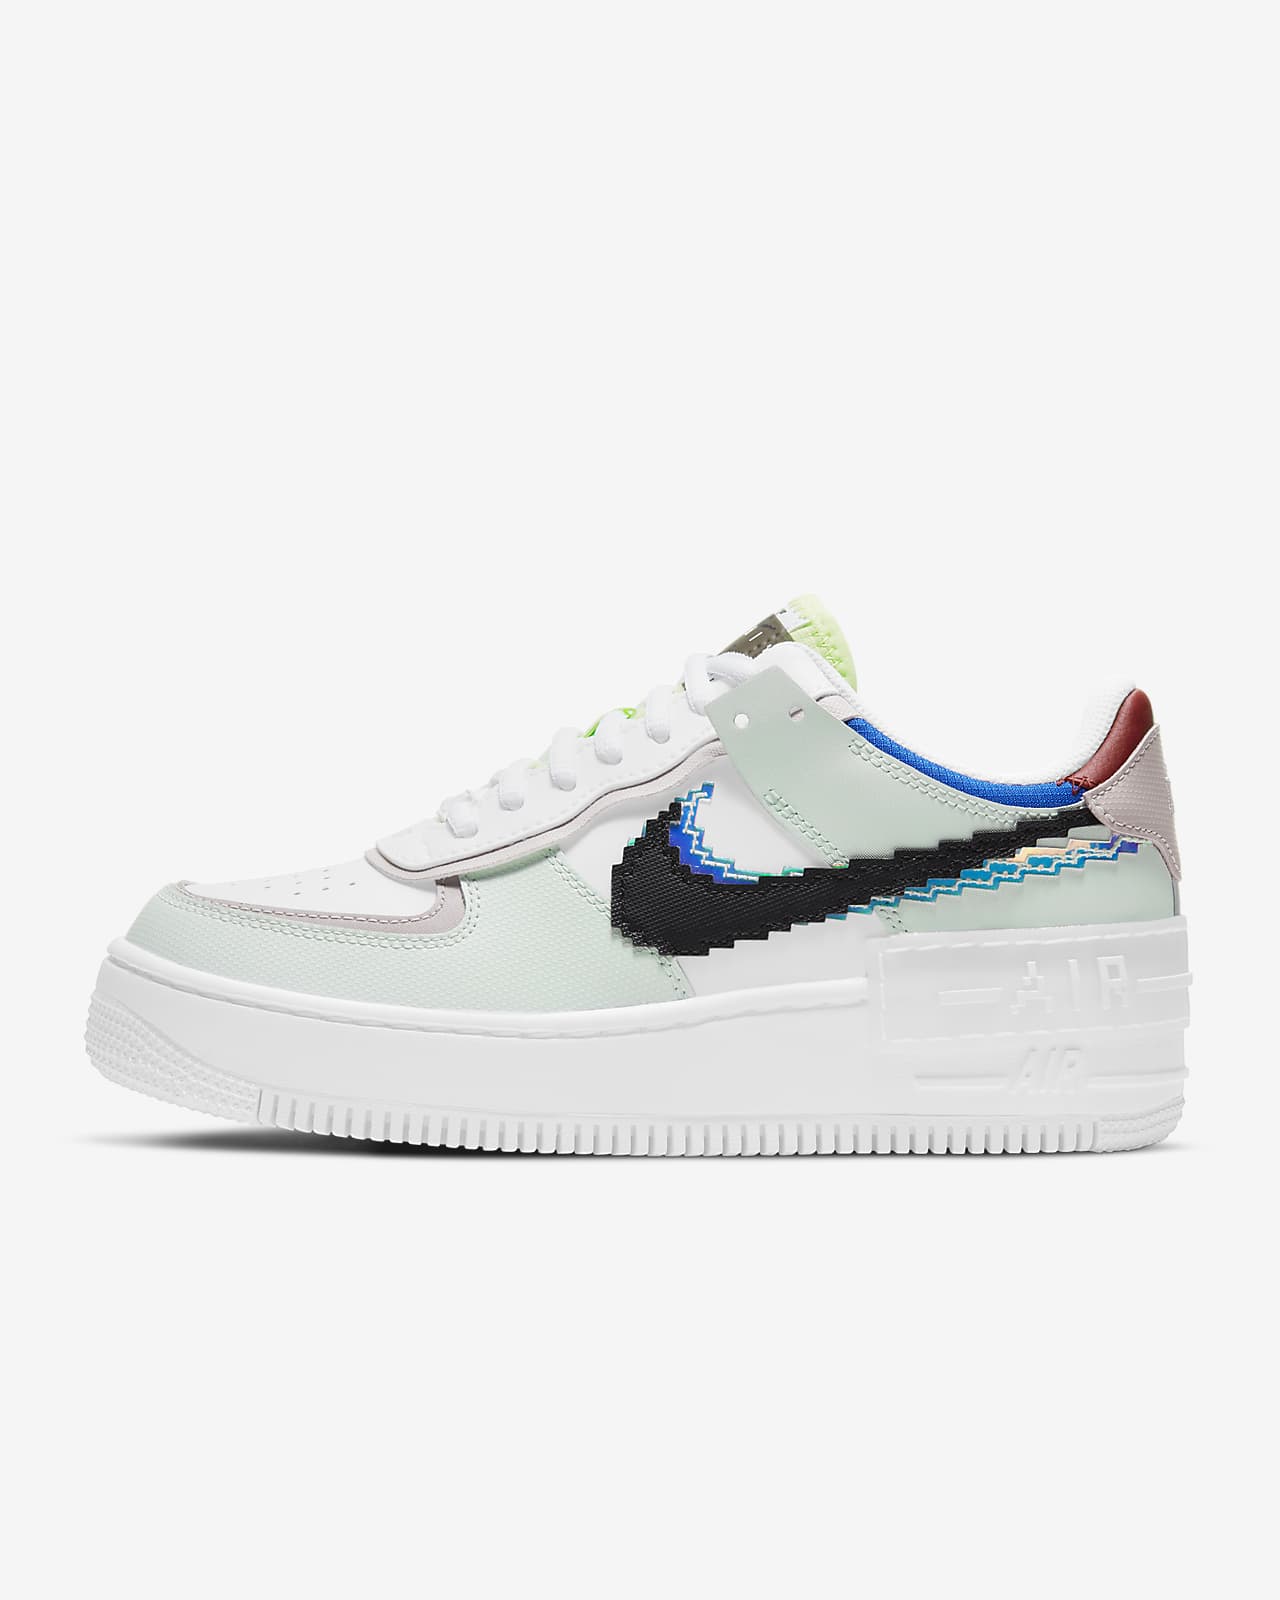 Nike Air Force 1 Shadow SE Women's Shoes